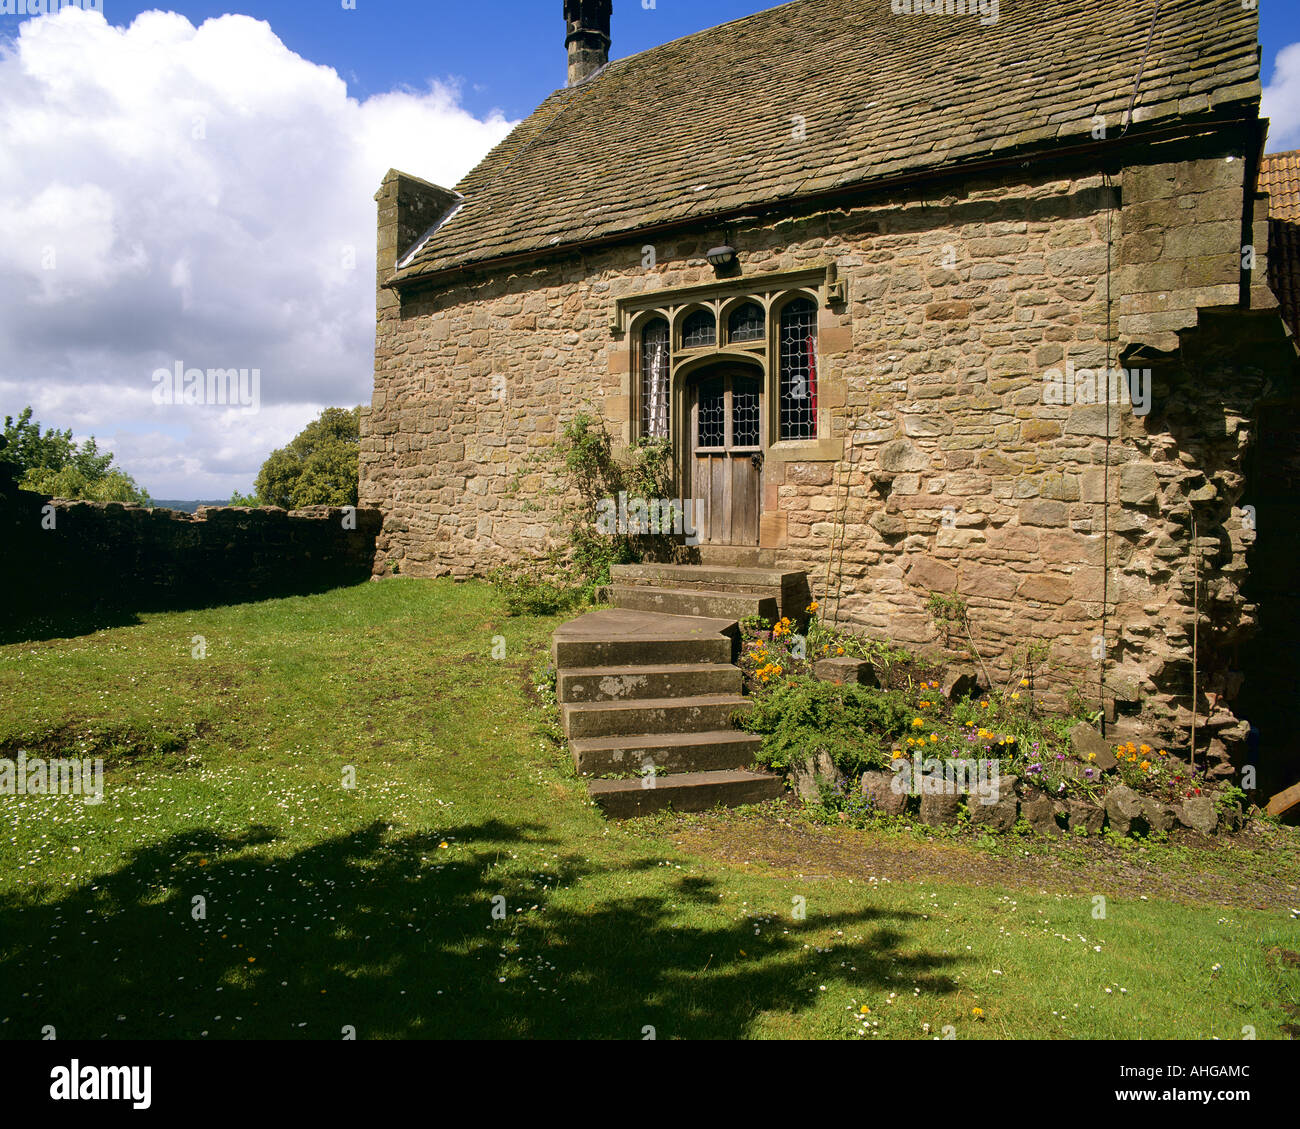 GB - GLOUCESTERSHIRE: St. Briavels Schloß im Forest of Dean Stockfoto